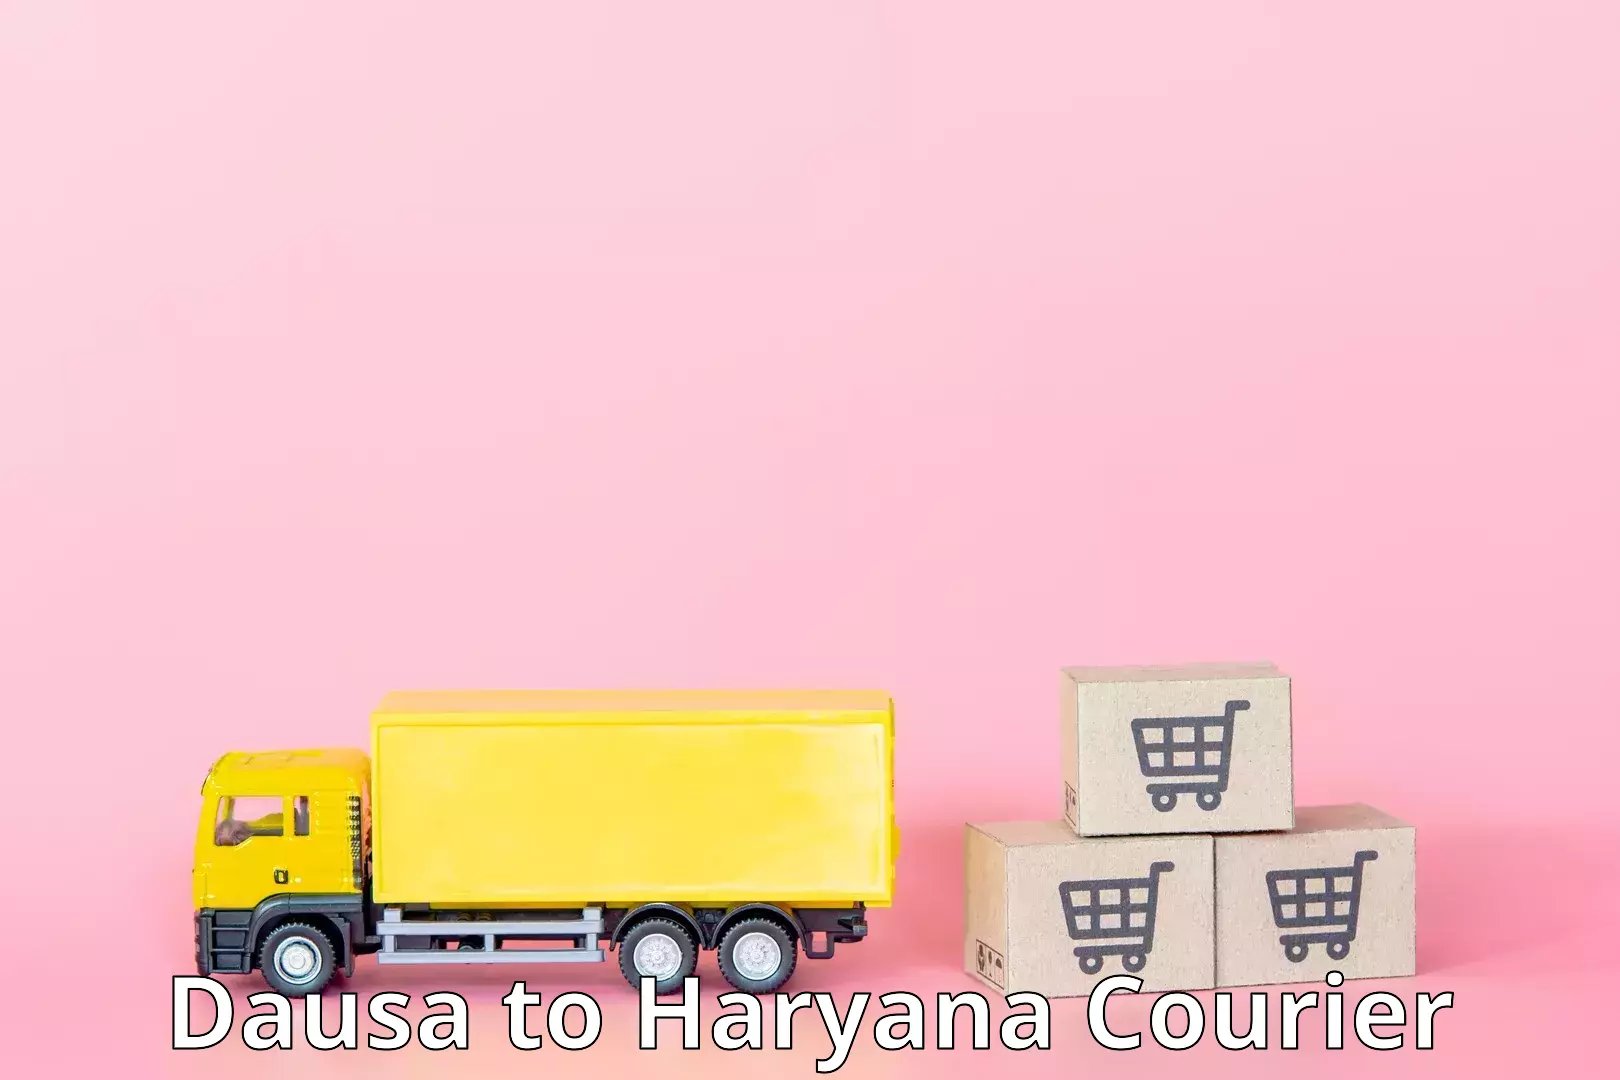 Courier service comparison Dausa to Haryana